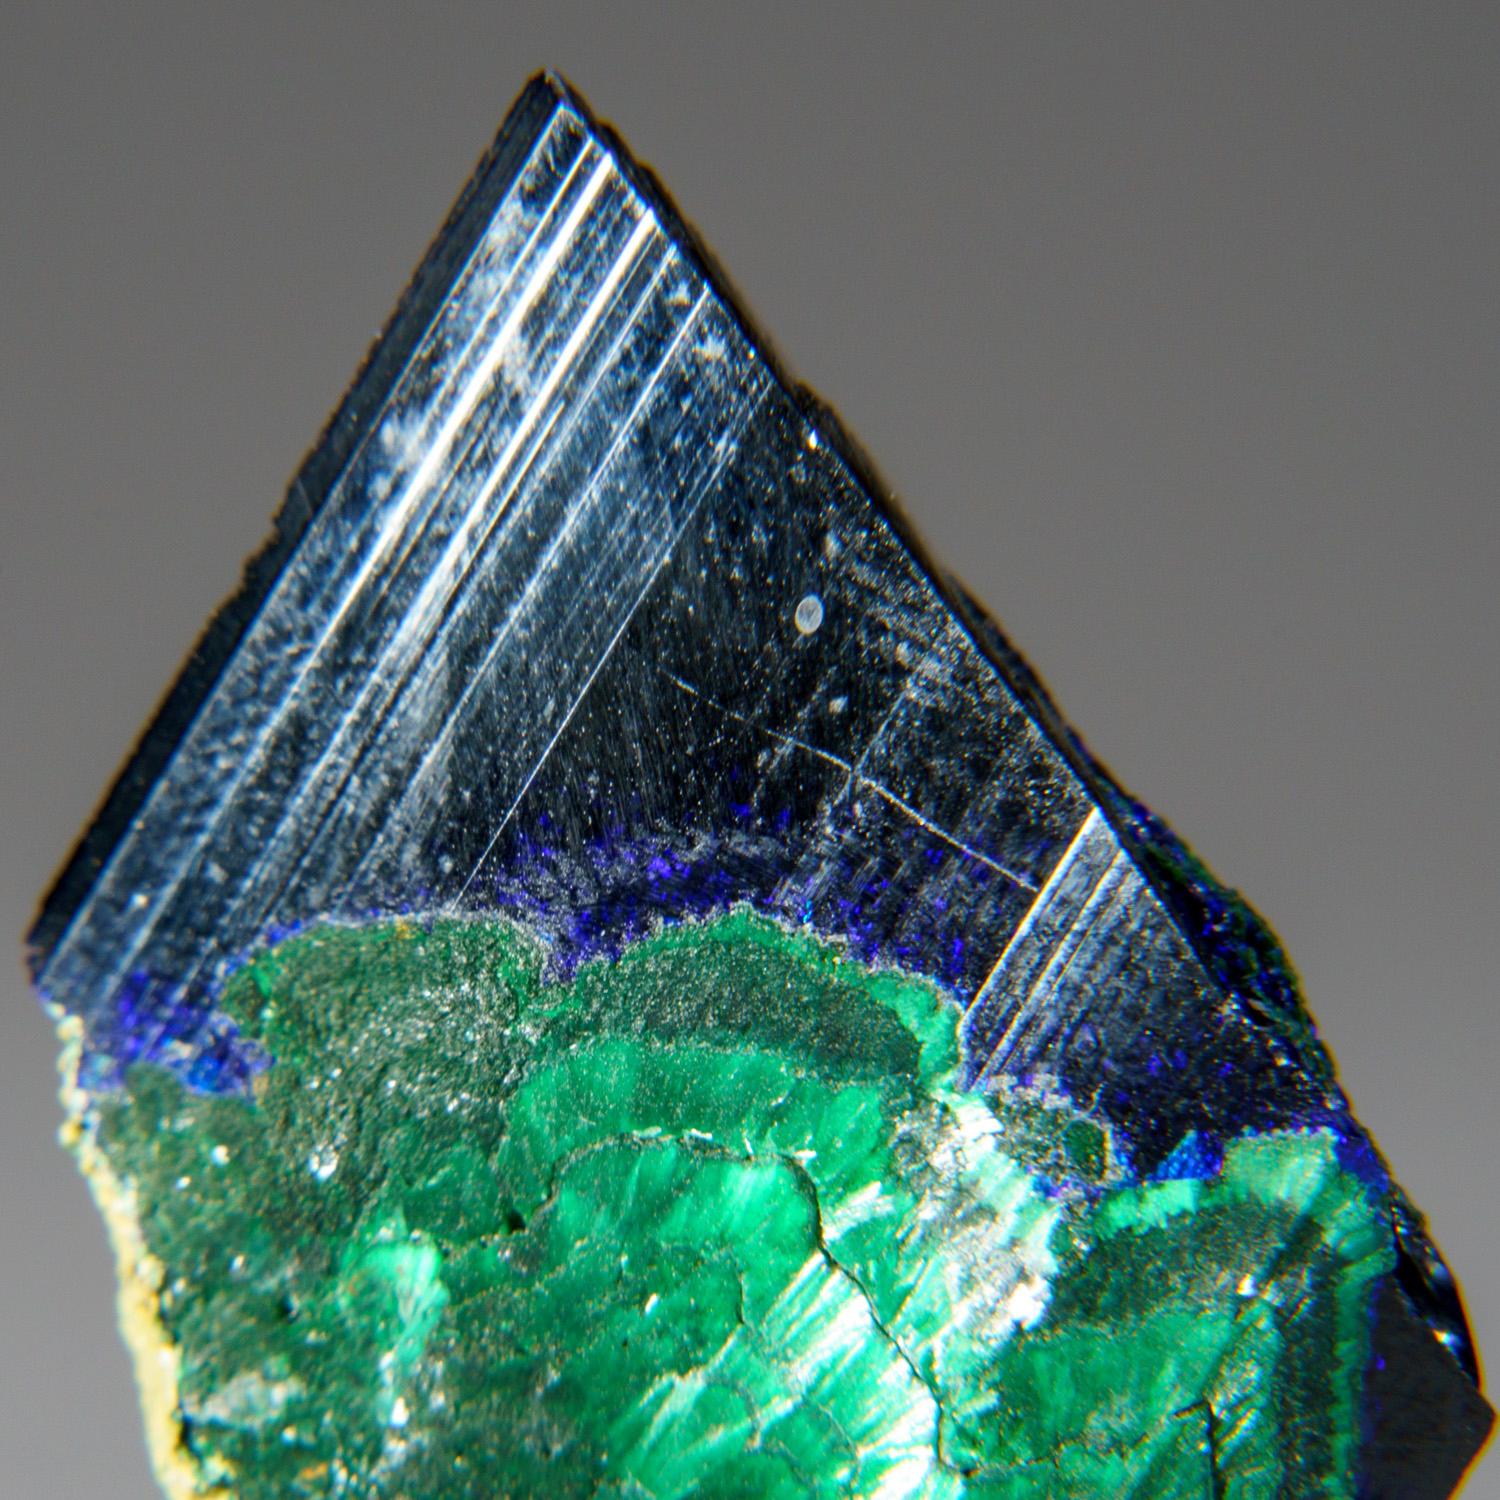 From Tsumeb Mine, Otavi-Bergland District, Oshikoto, Namibia

Large single crystal of translucent blue azurite with scattered areas that partially altered to green malachite. The azurite crystal is striated bladed form with chisel-shaped